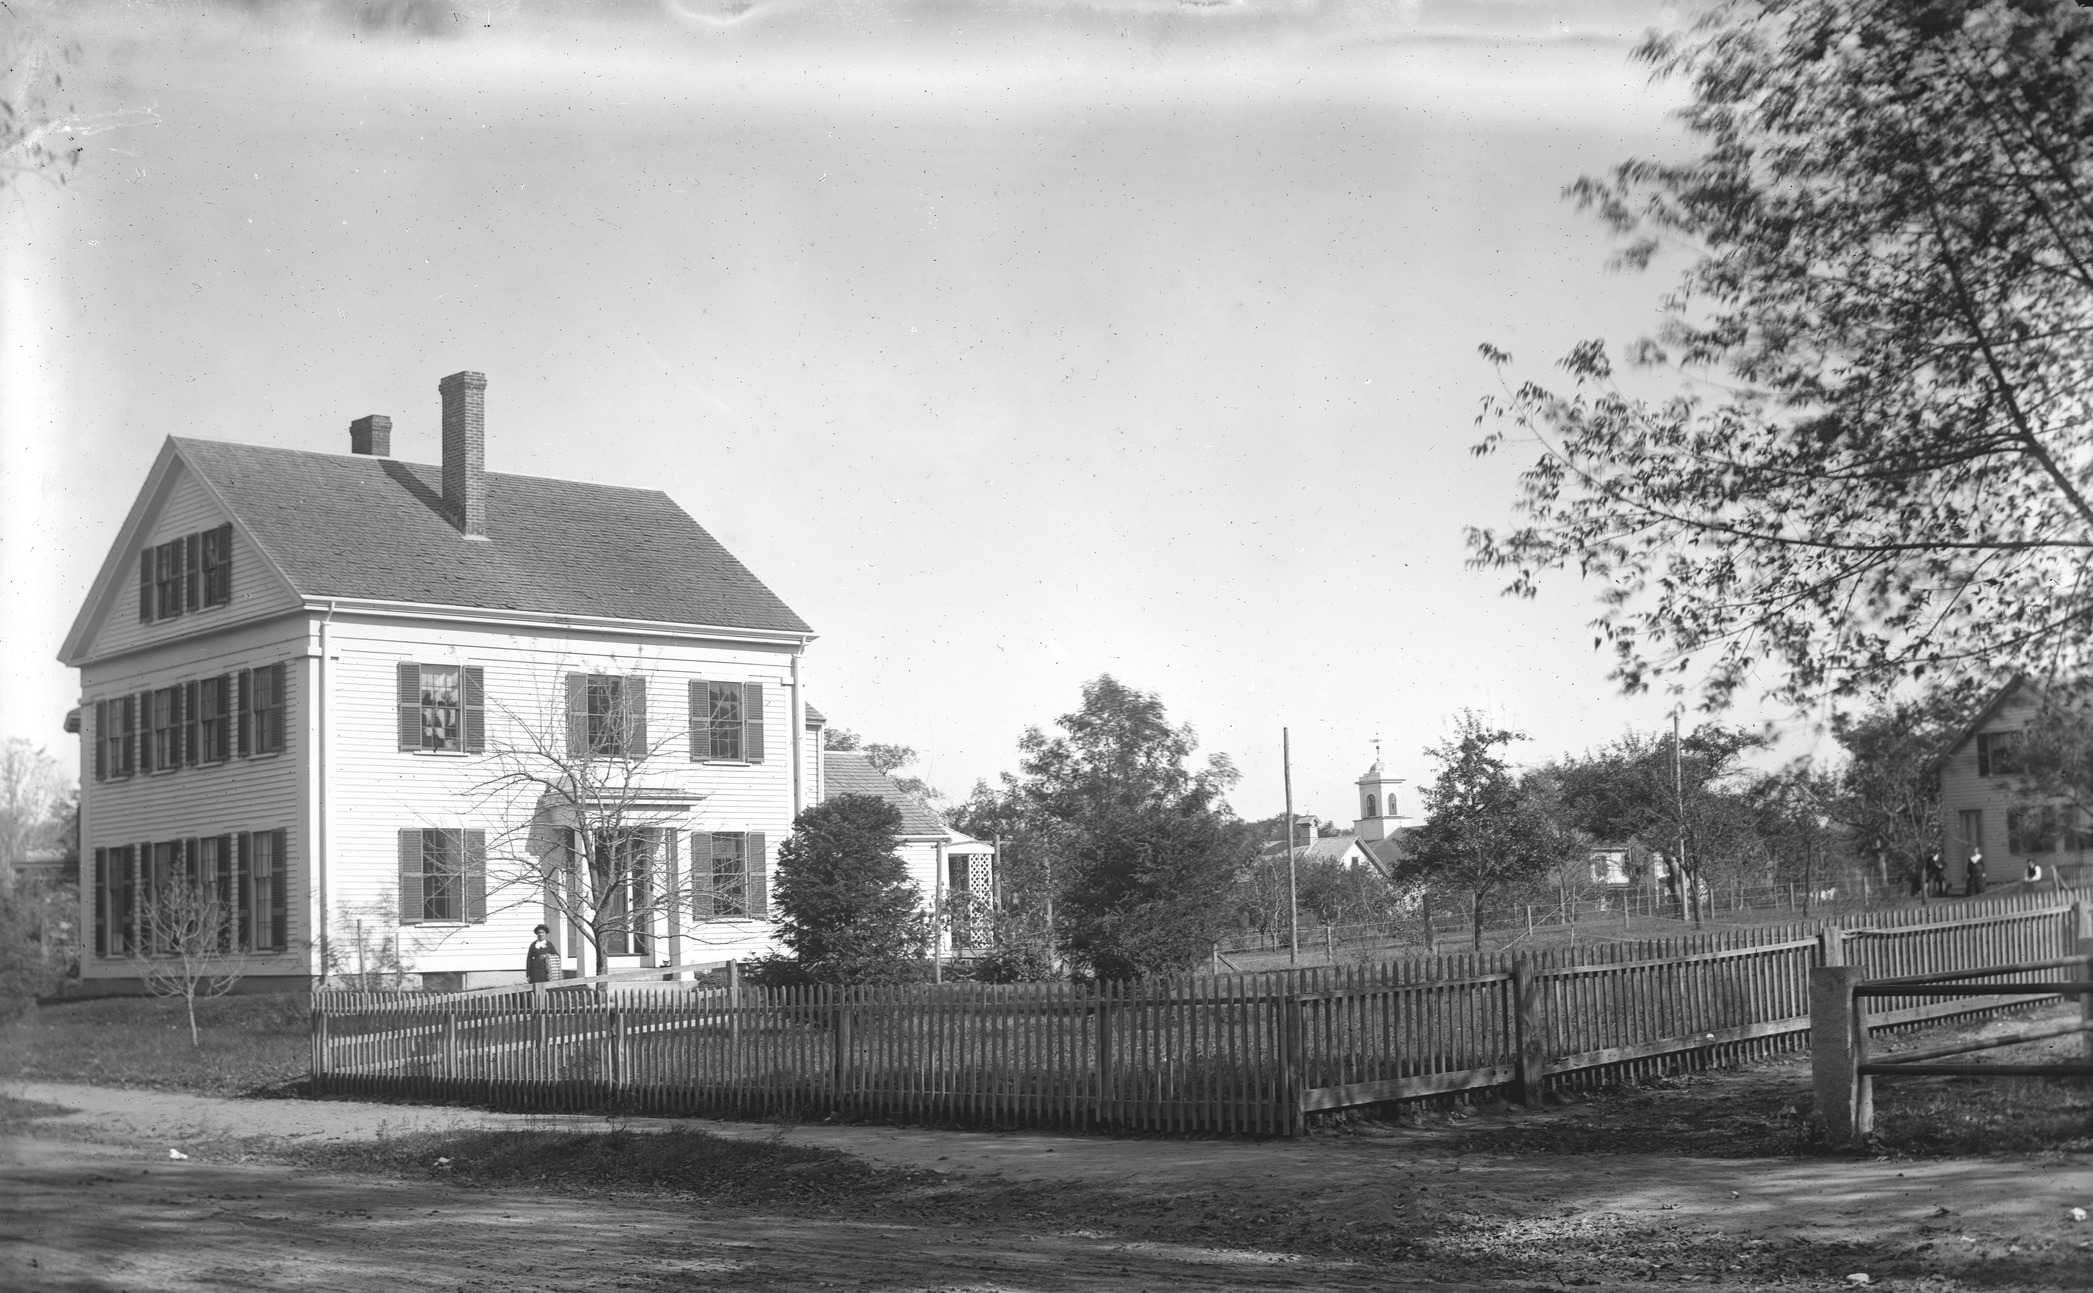 Photograph of the Ann Bigelow House in Concord, MA.